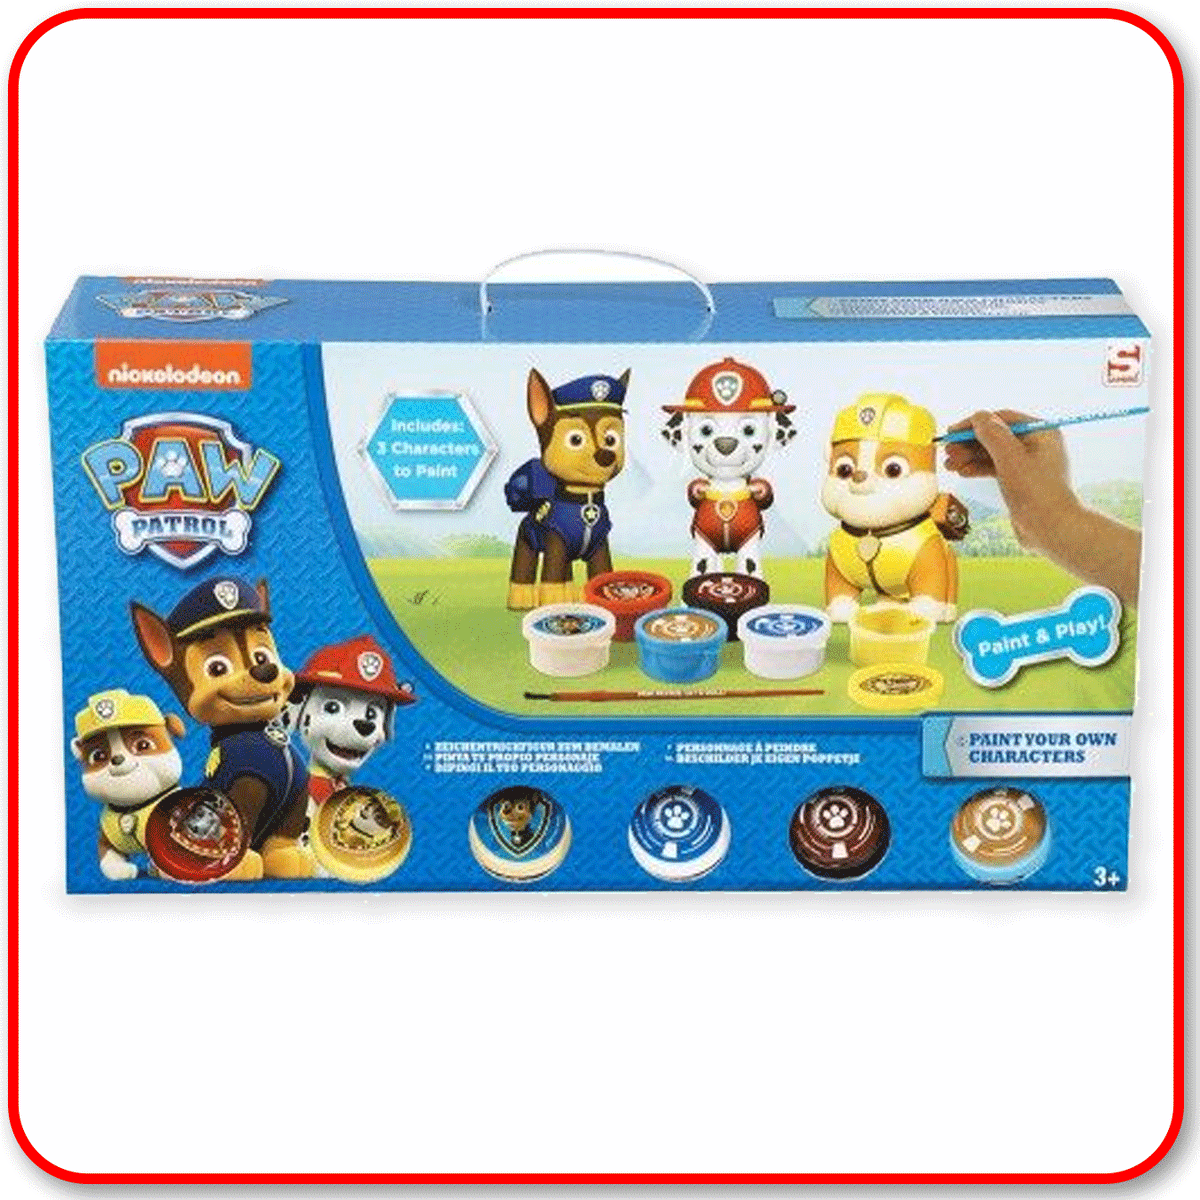 PAW PATROL PAINT YOUR OWN FIGURES CHARACTERS 3D PAINTING ART DIY TOY SET